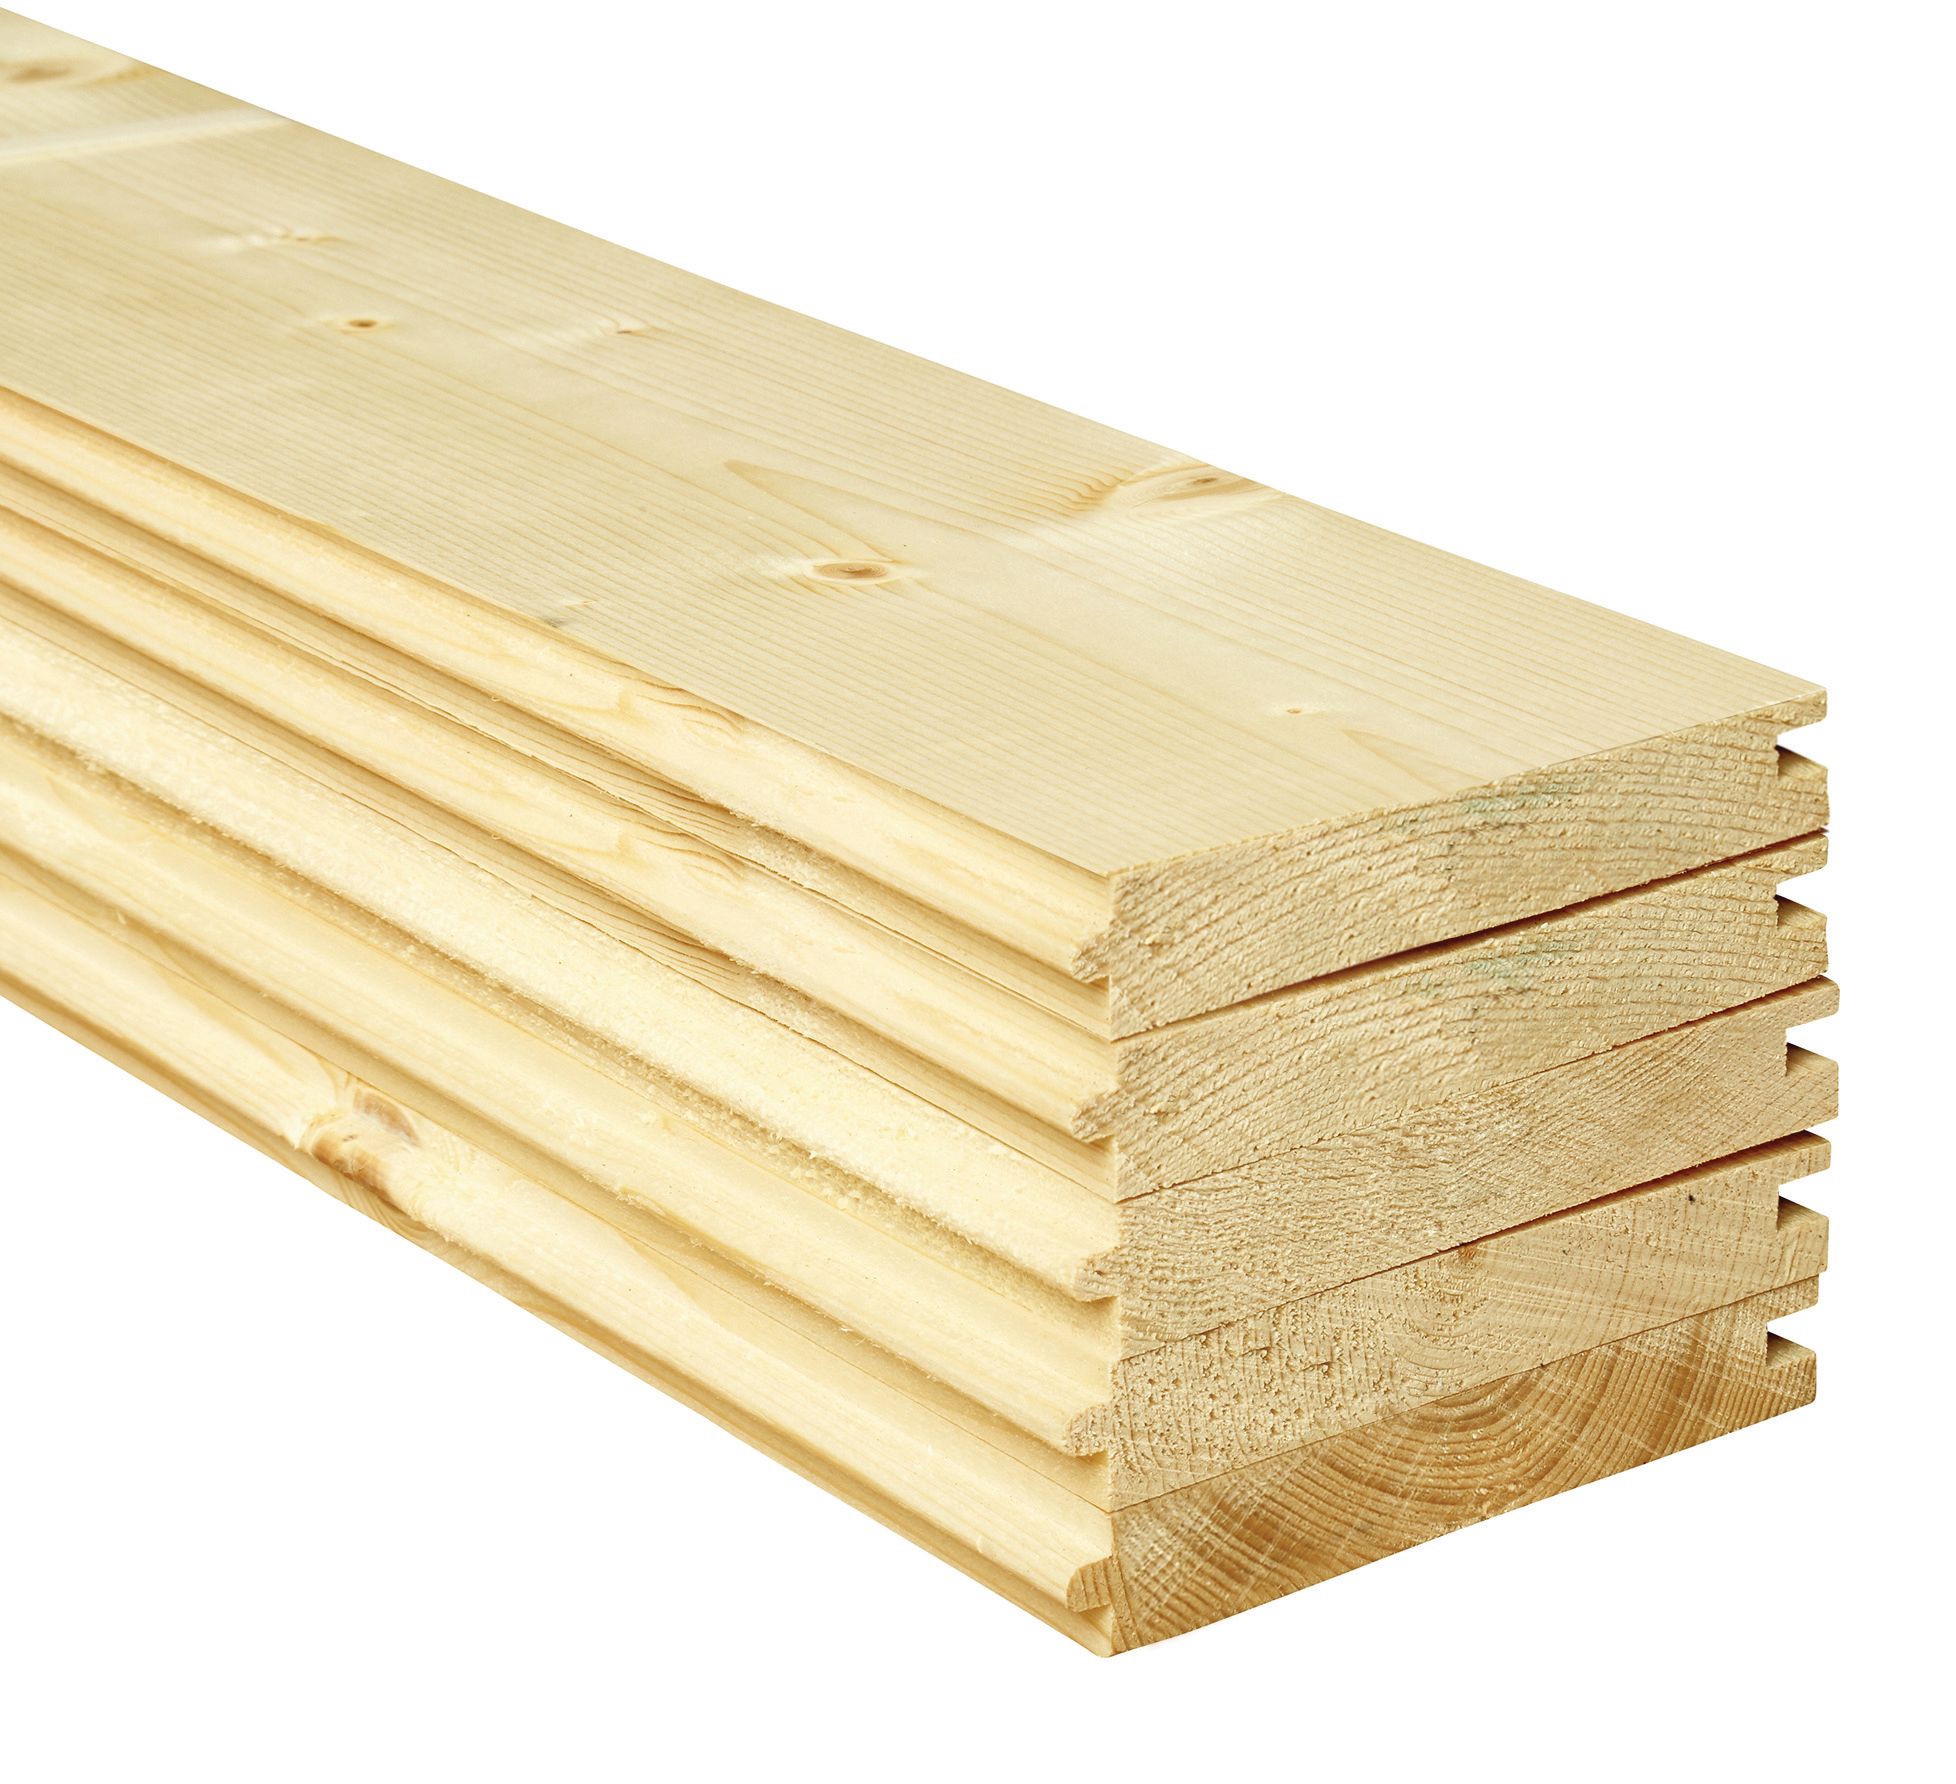 Image of Wickes PTG Timber Floorboards - 18mm x 119mm x 3000mm - Pack of 5